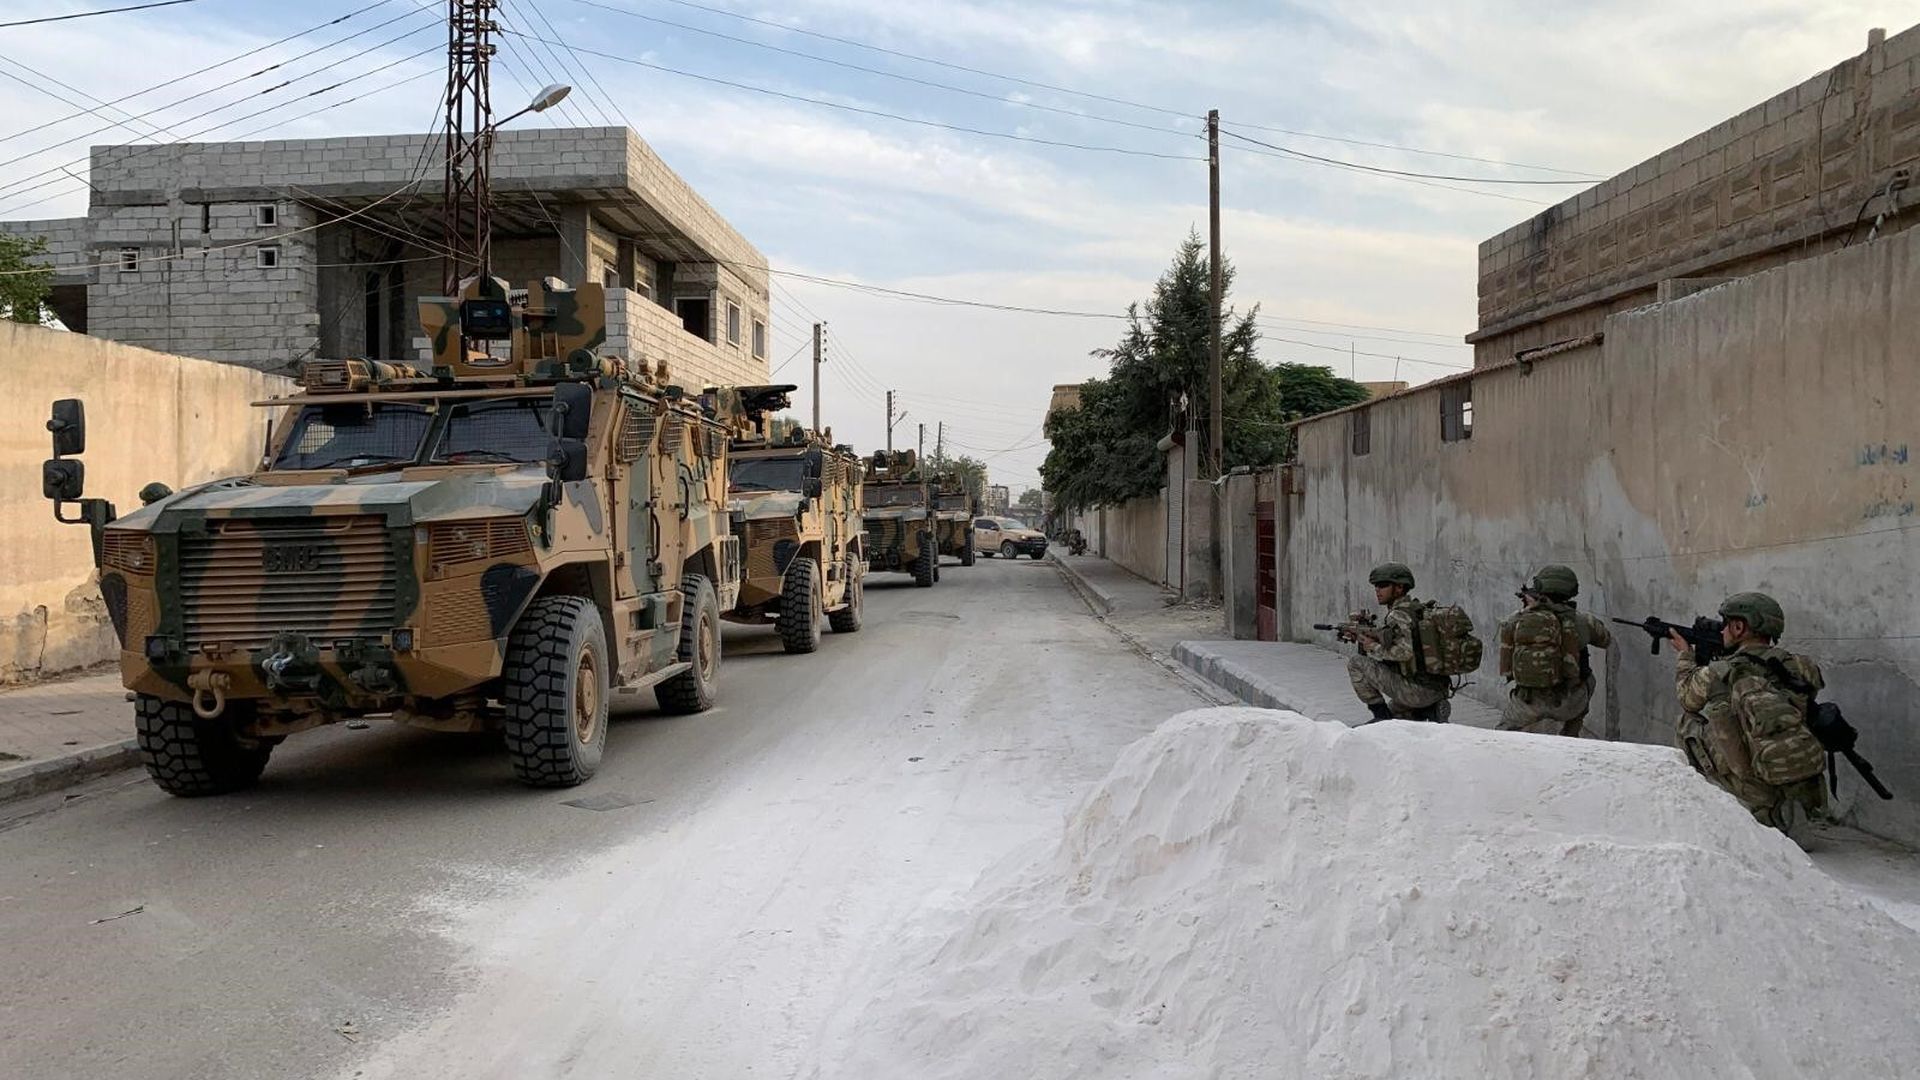 Turkish soldiers posted along a road in a Syrian border town